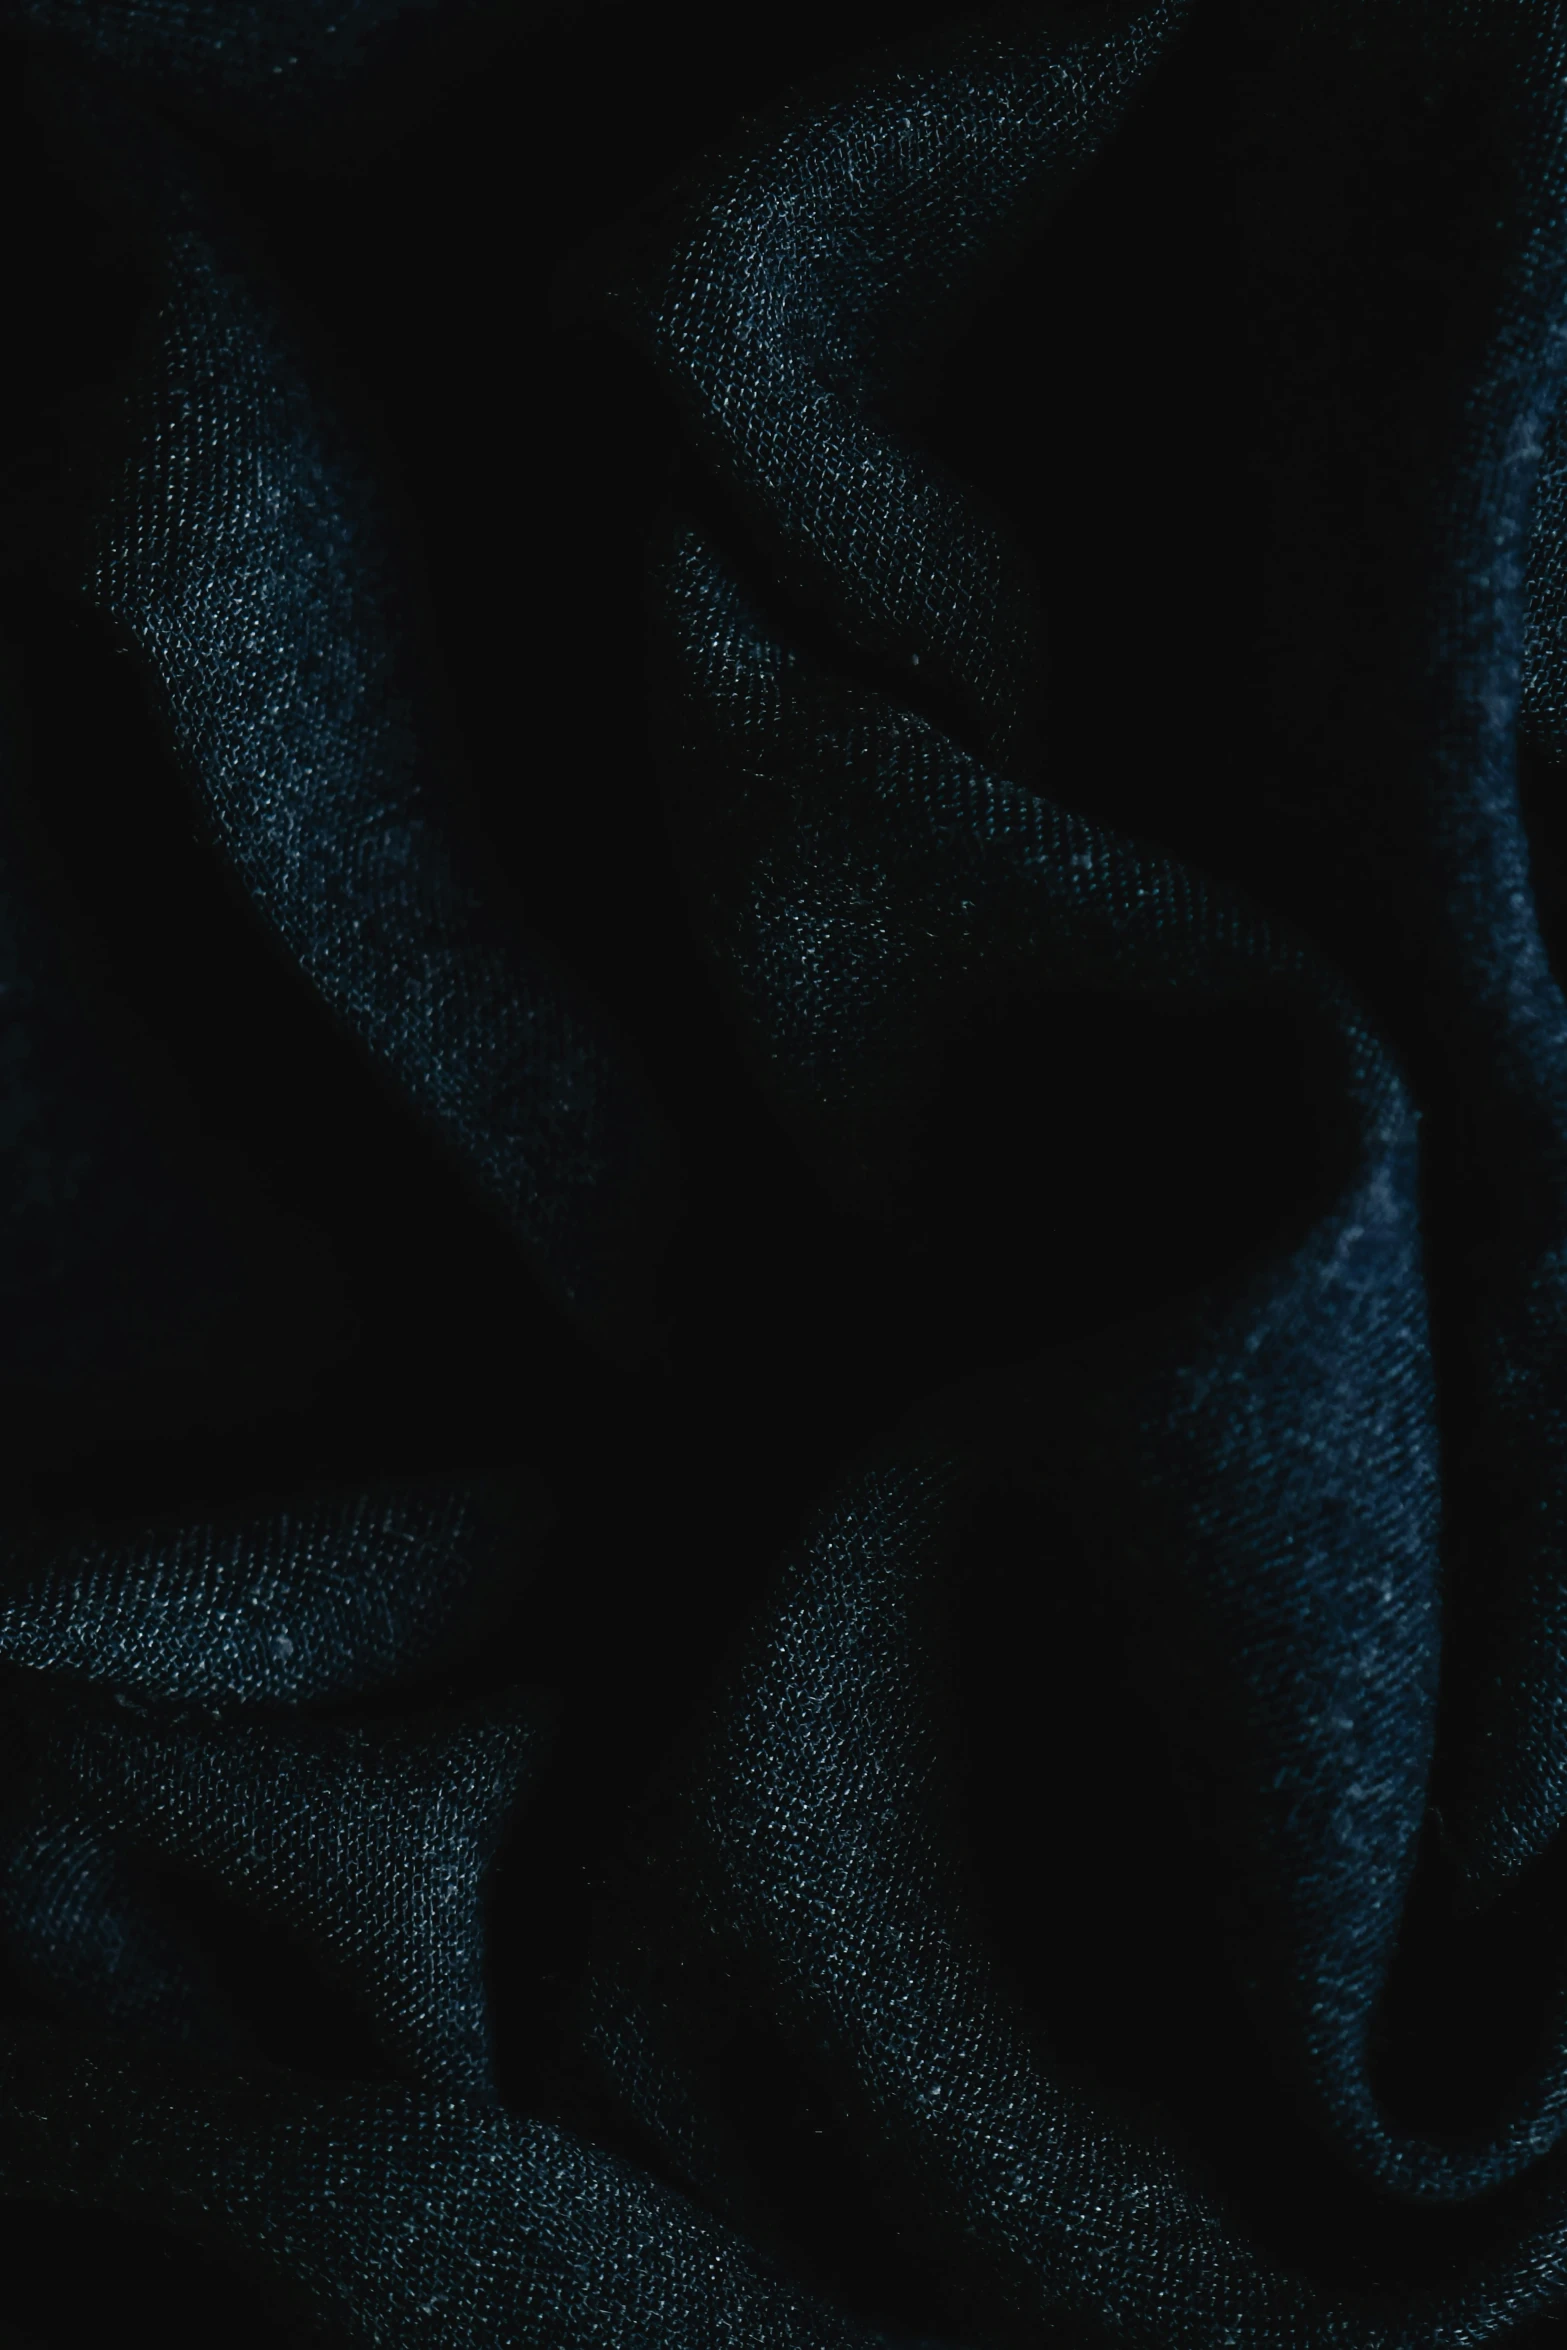 a black fabric with some folds or folds